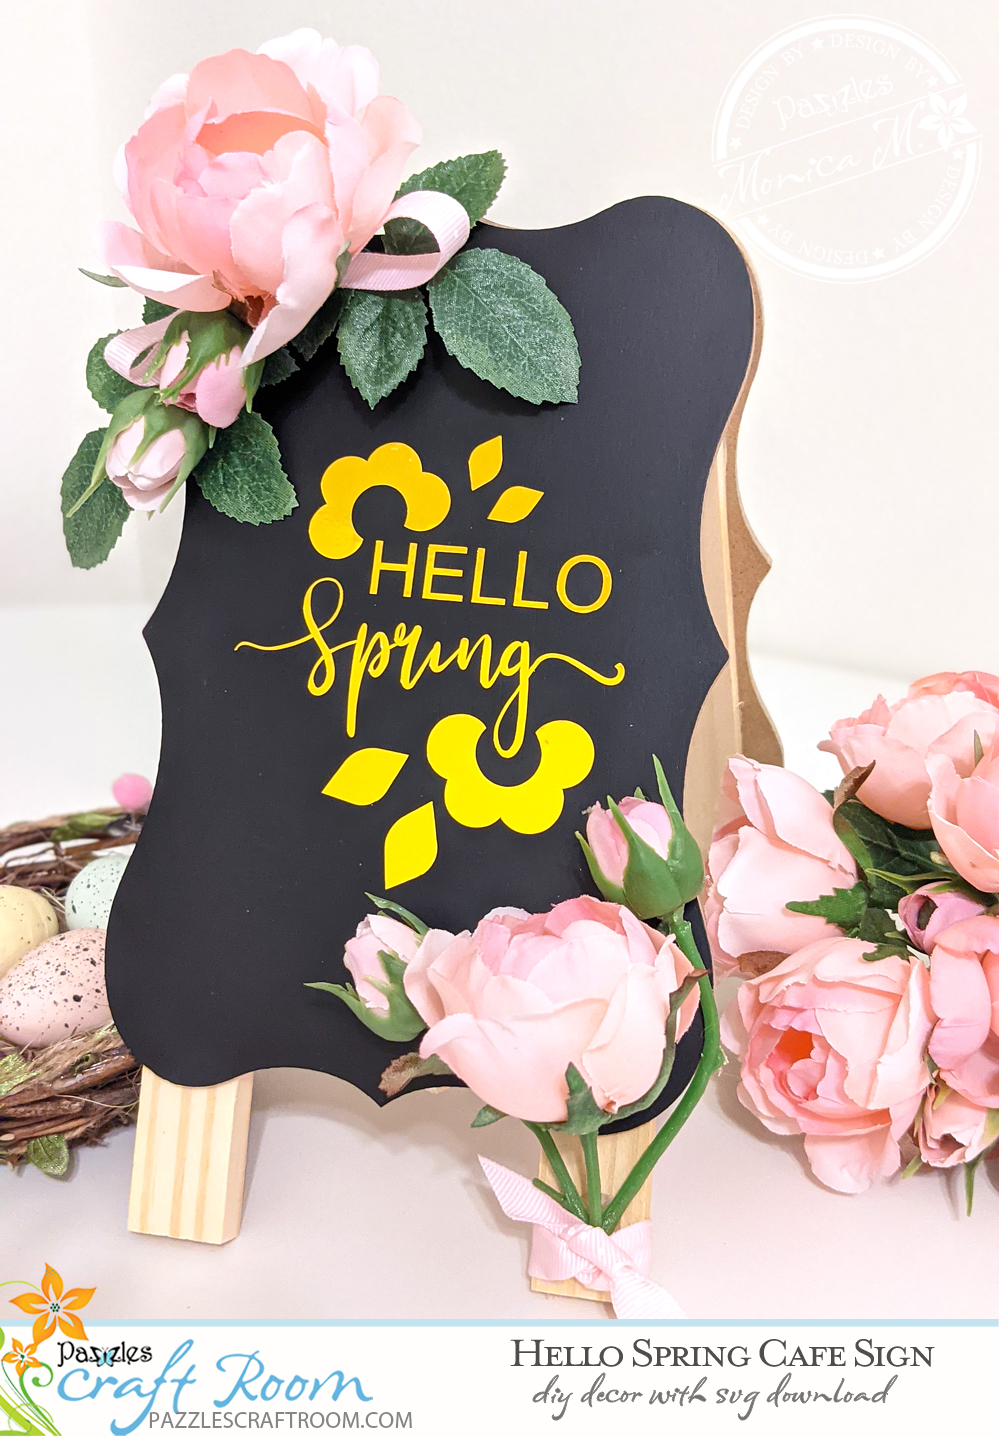 Pazzles DIY Hello Spring Cafe Sign with instant SVG download. Instant SVG download compatible with all major electronic cutters including Pazzles Inspiration, Cricut, and Silhouette Cameo. Design by Monica Martinez. 